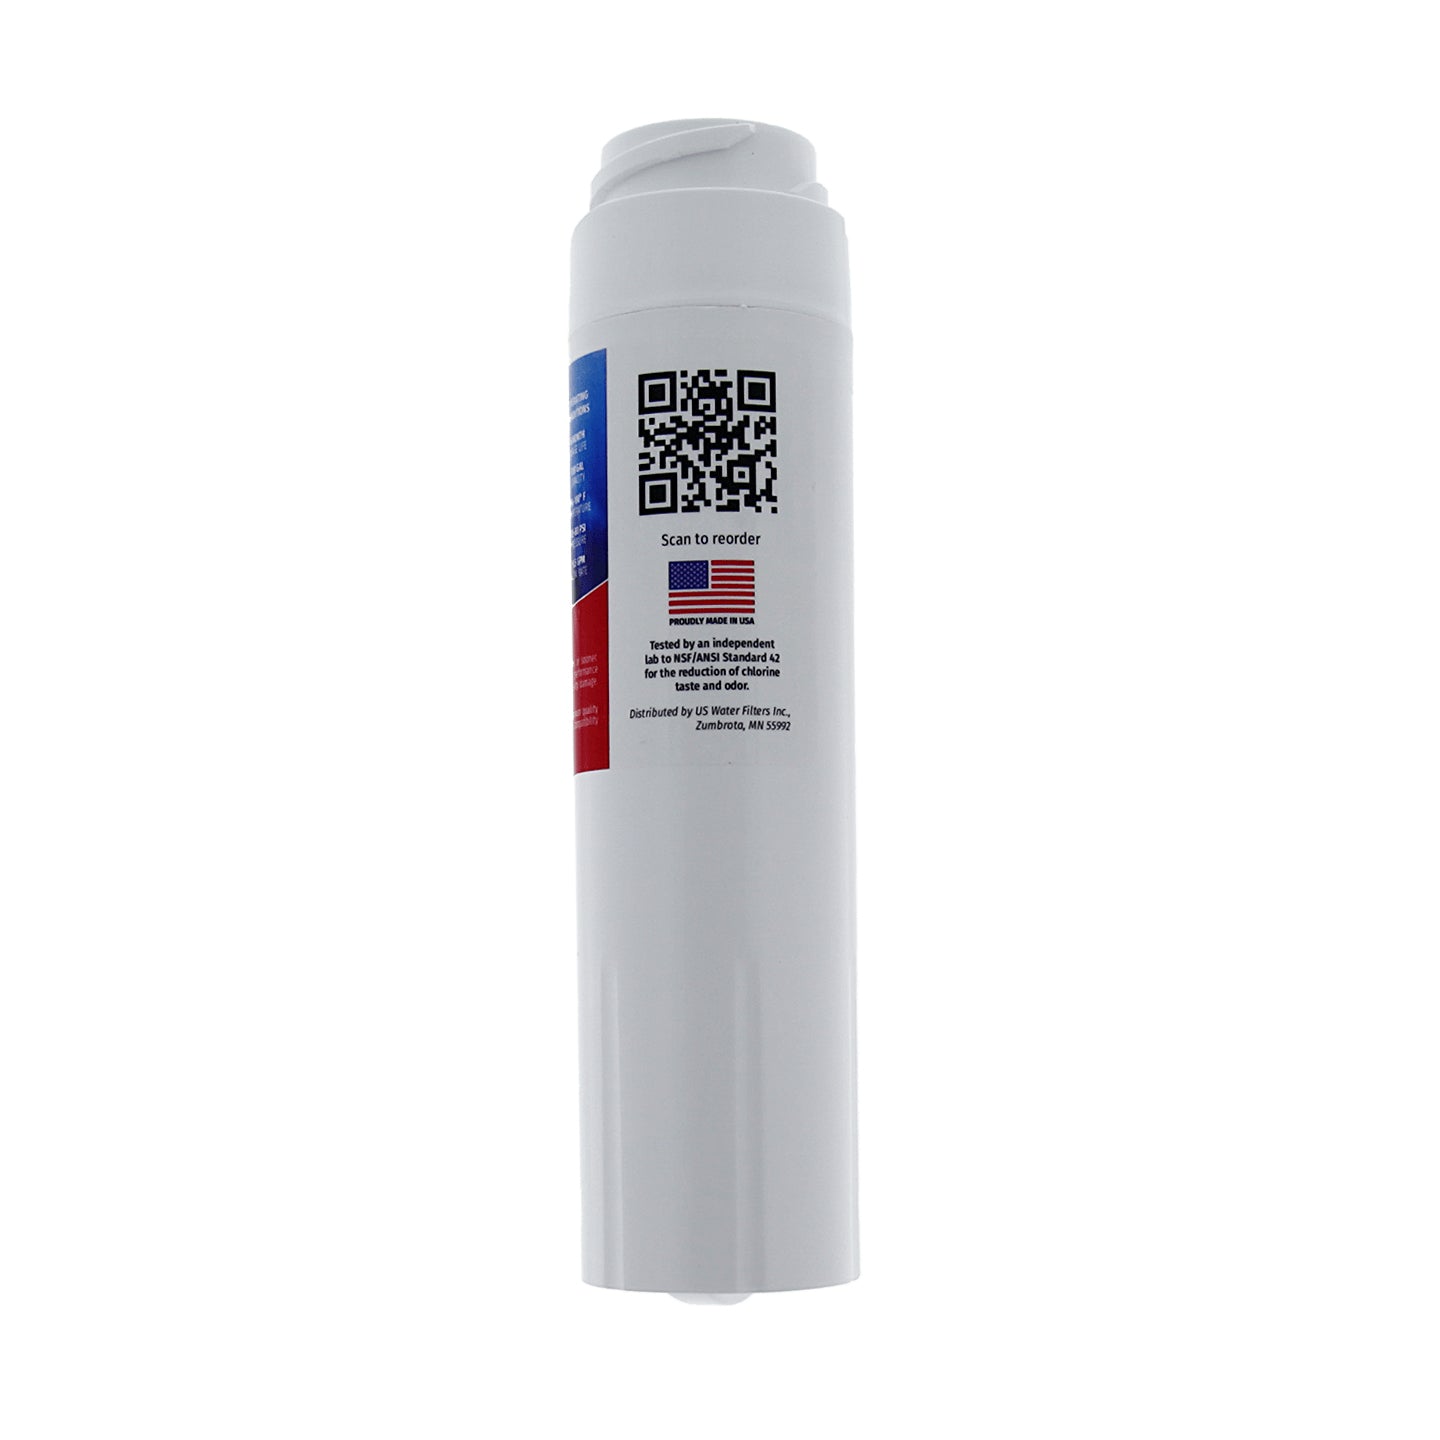 GSWF GE Comparable SmartWater Filter Replacement By USWF